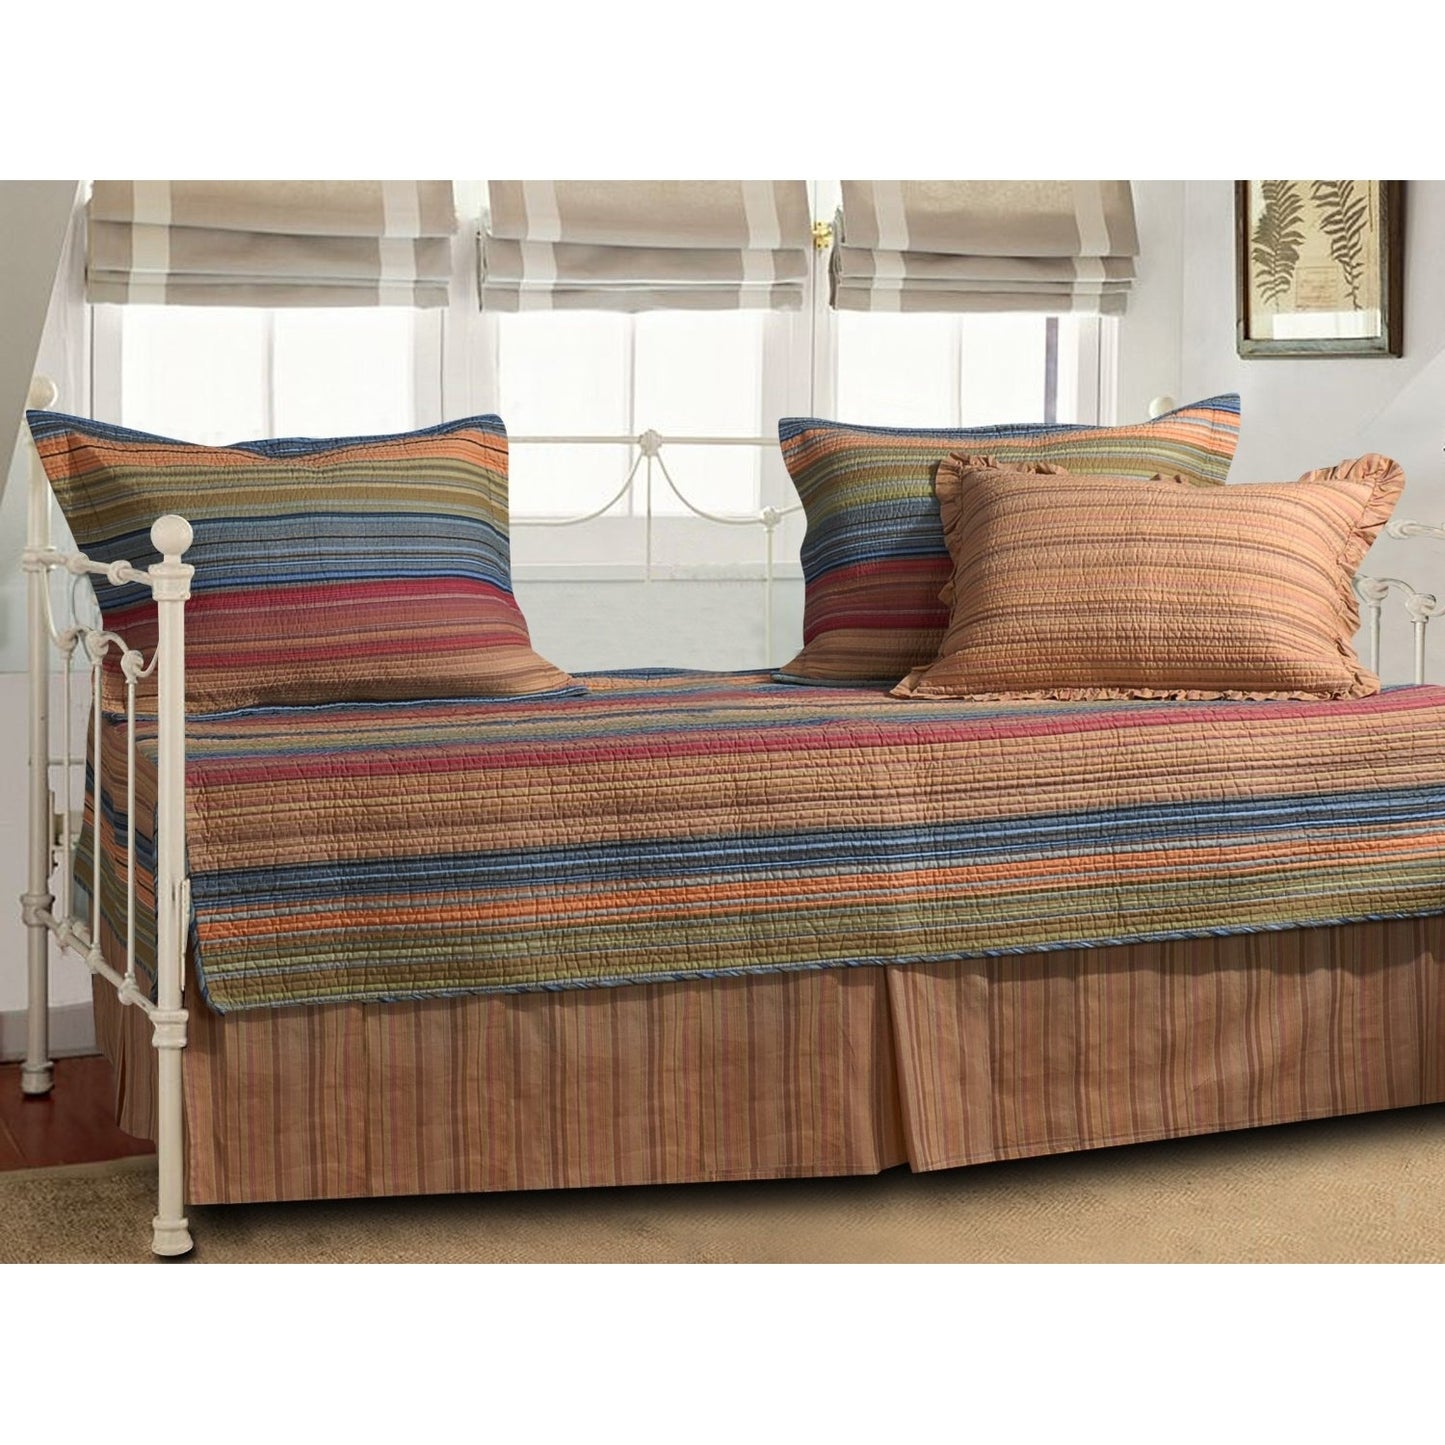 Reversible 5-Piece Daybed Bedding Set with Bed-skirt and Three Pillow Shams